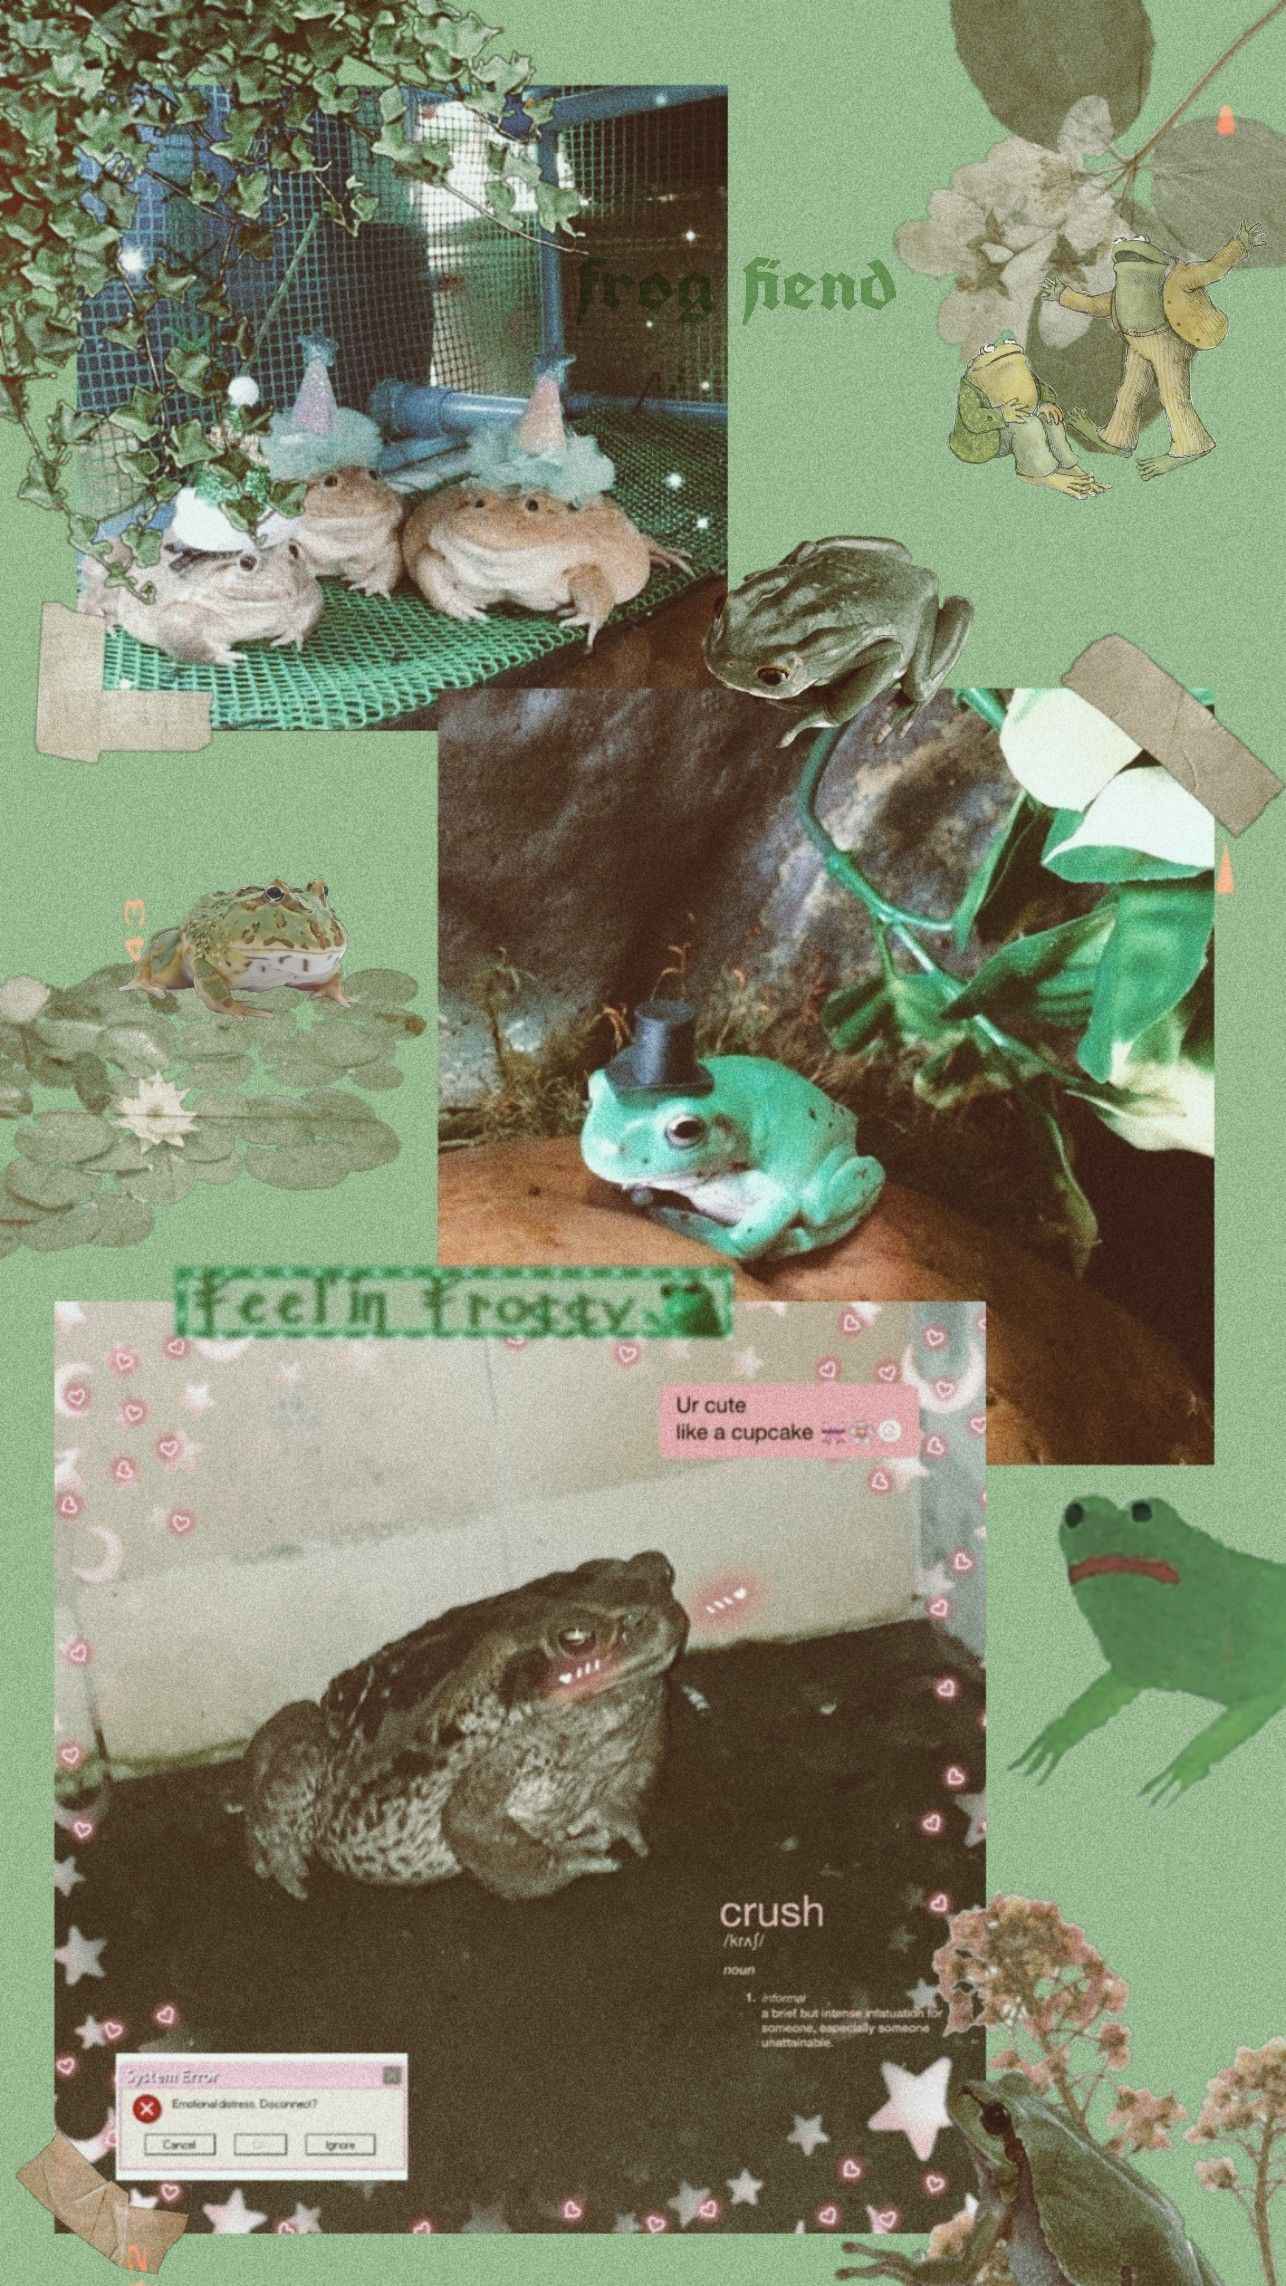 Frog wallpaper. Frog wallpaper, Frog picture, Cute frogs